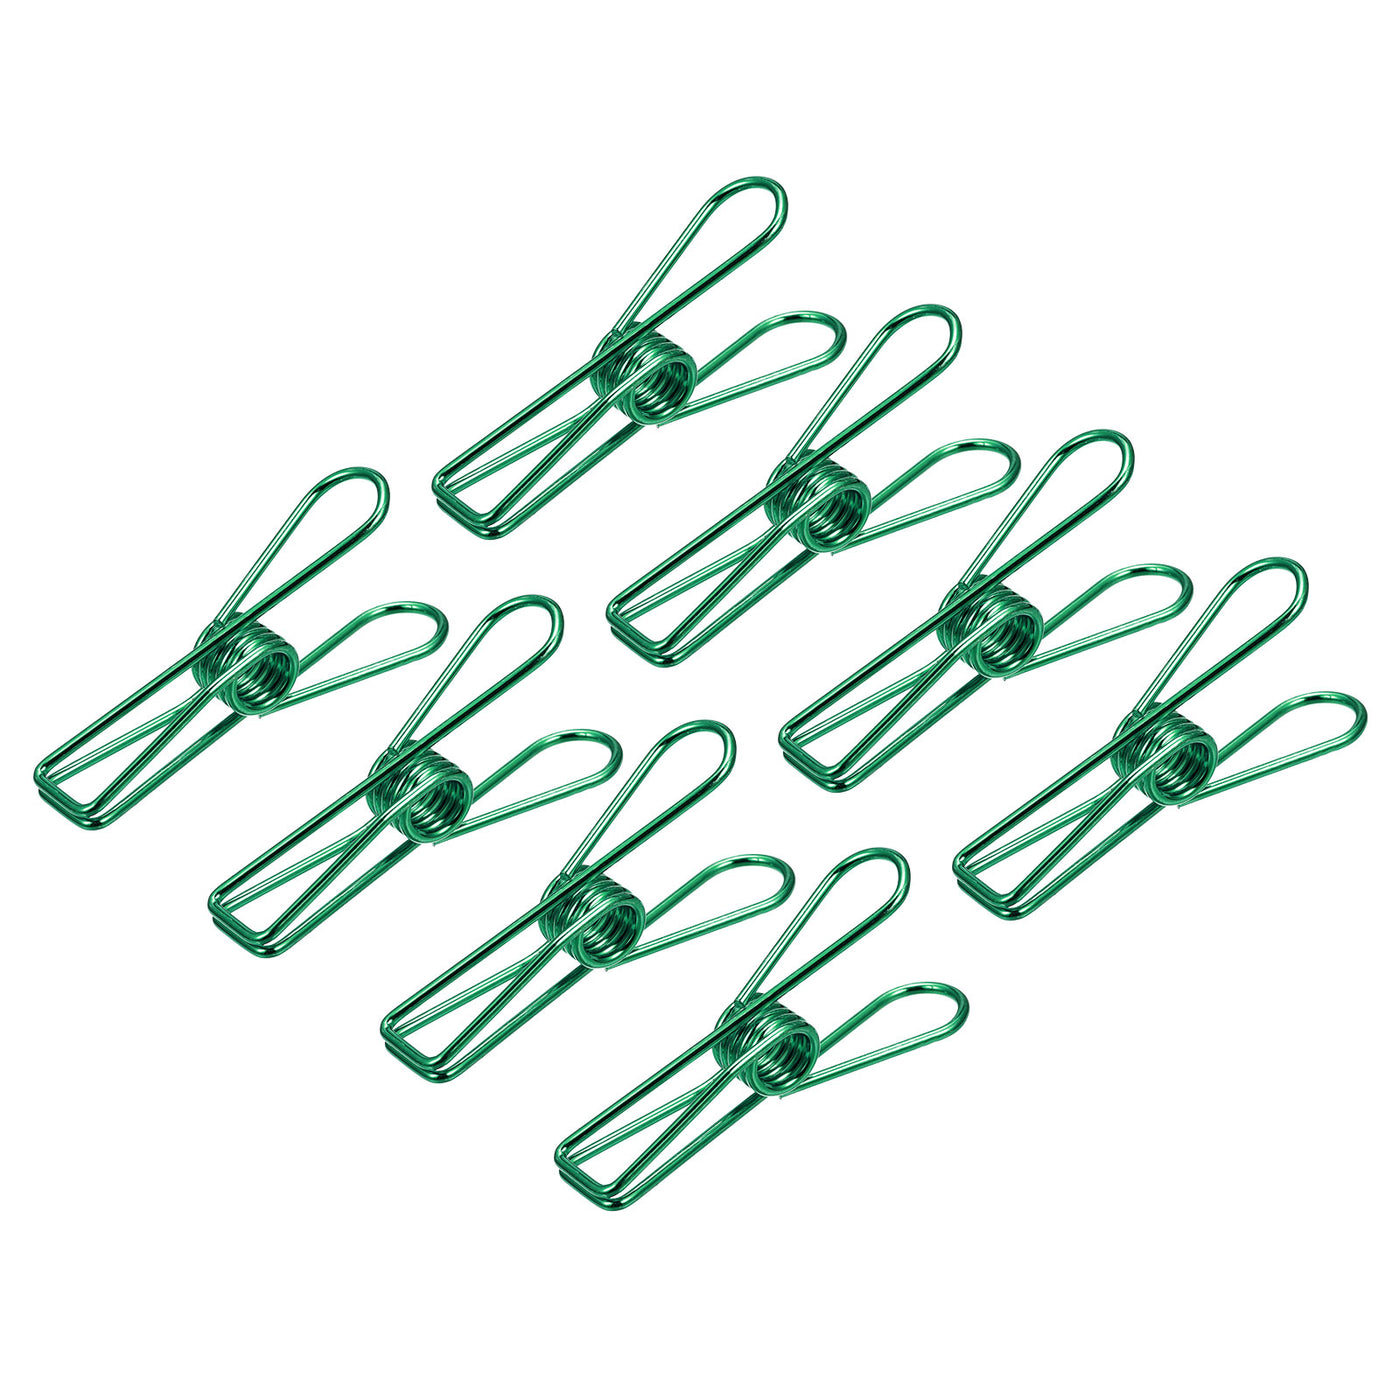 uxcell Uxcell Tablecloth Clips, 55mm Carbon Steel Clamps for Fix Table Cloth, Green 8 Pcs